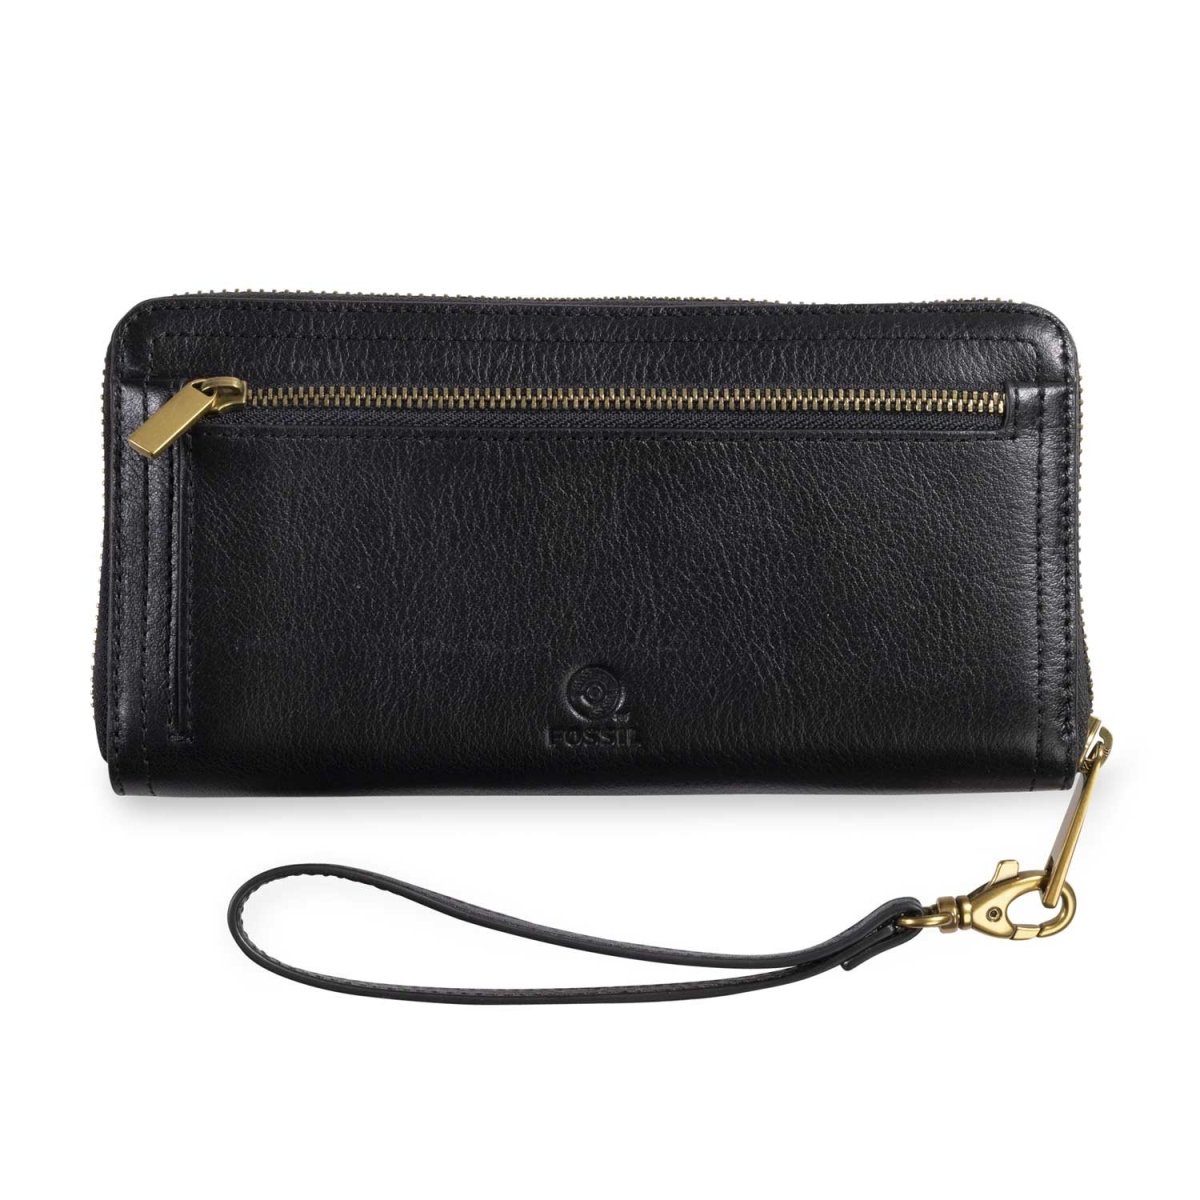 Handbags and Purses For Women - Fossil US